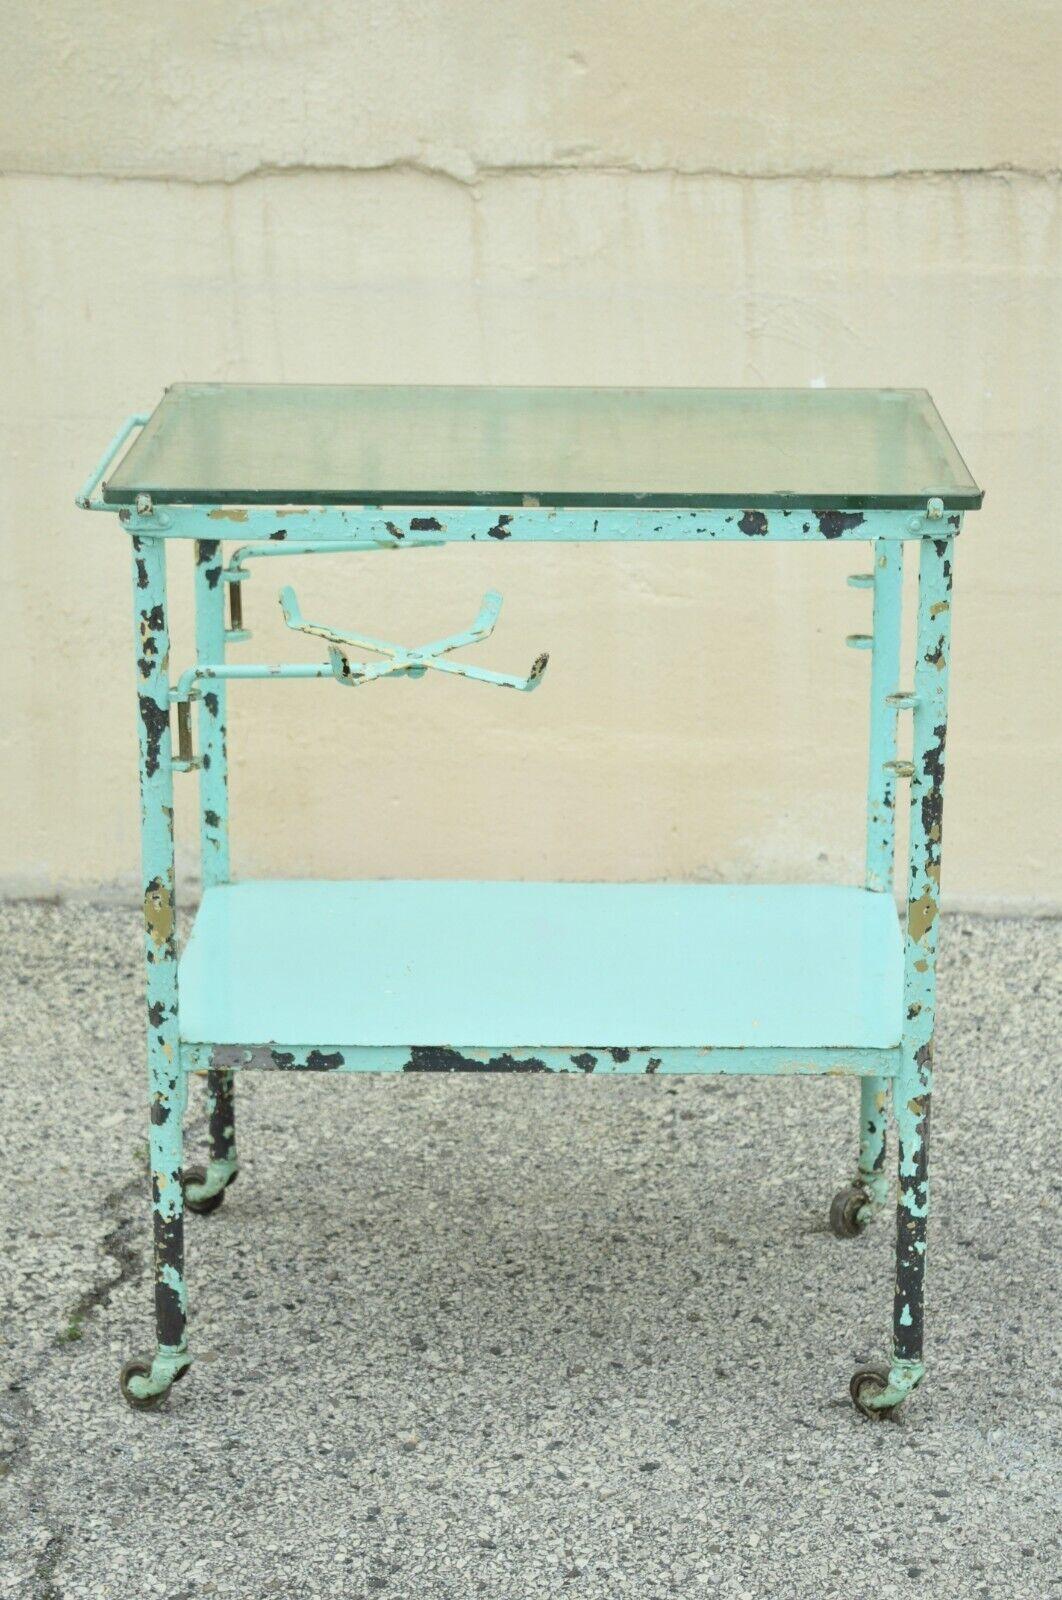 Antique aqua blue distress paint metal glass 2 tier medical dental cart table.
Item features (2) swing out supply holders, glass top, lower shelf, rolling casters, distressed finished, very nice antique item, quality American craftsmanship, great